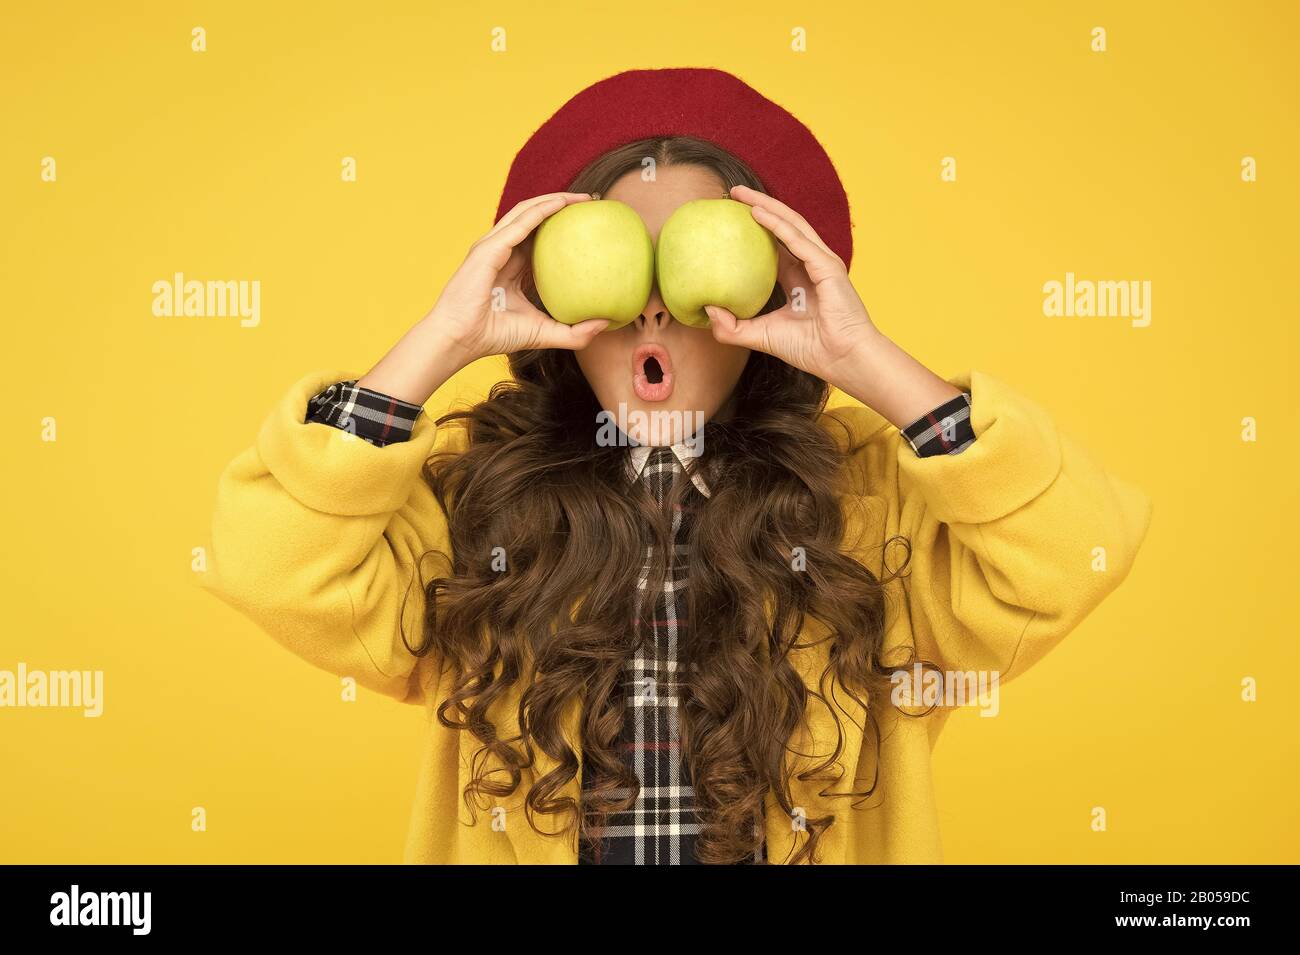 Impressing harvest. Girl cute long curly hair hold apples. Child girl emotional face expression. Delicious harvest. Harvest season. Child kid surprised face hold apples. Healthy food concept. Stock Photo